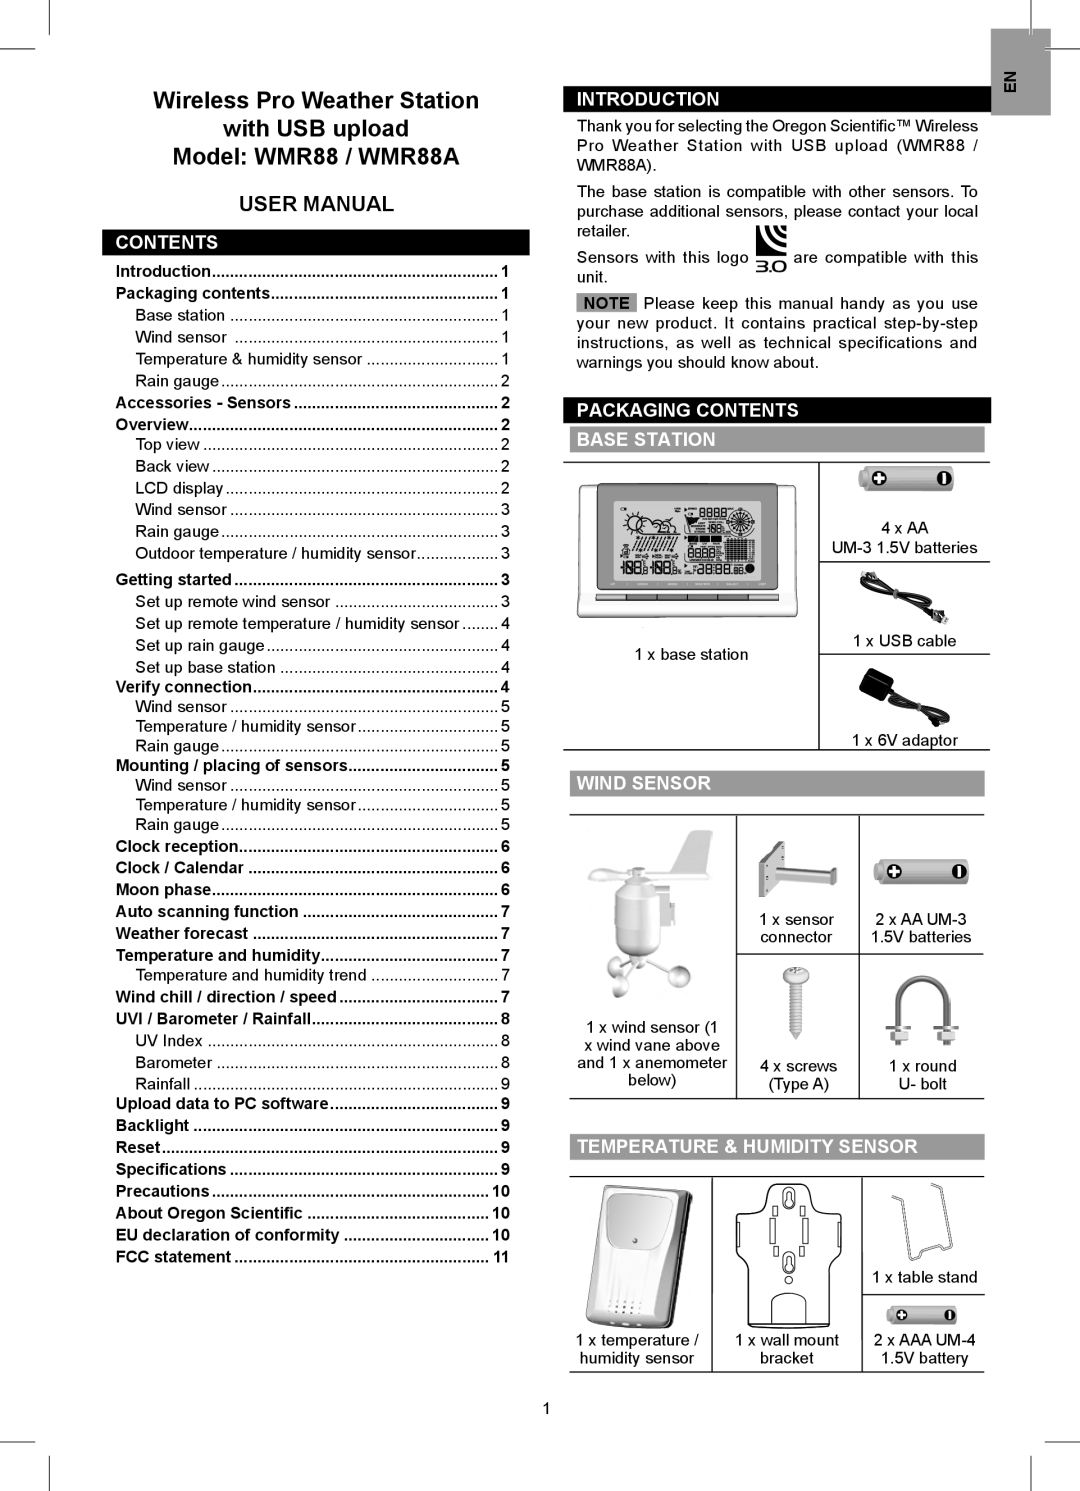 Oregon Scientific WMR88A user manual Introduction, Packaging Contents Base Station, Wind Sensor 